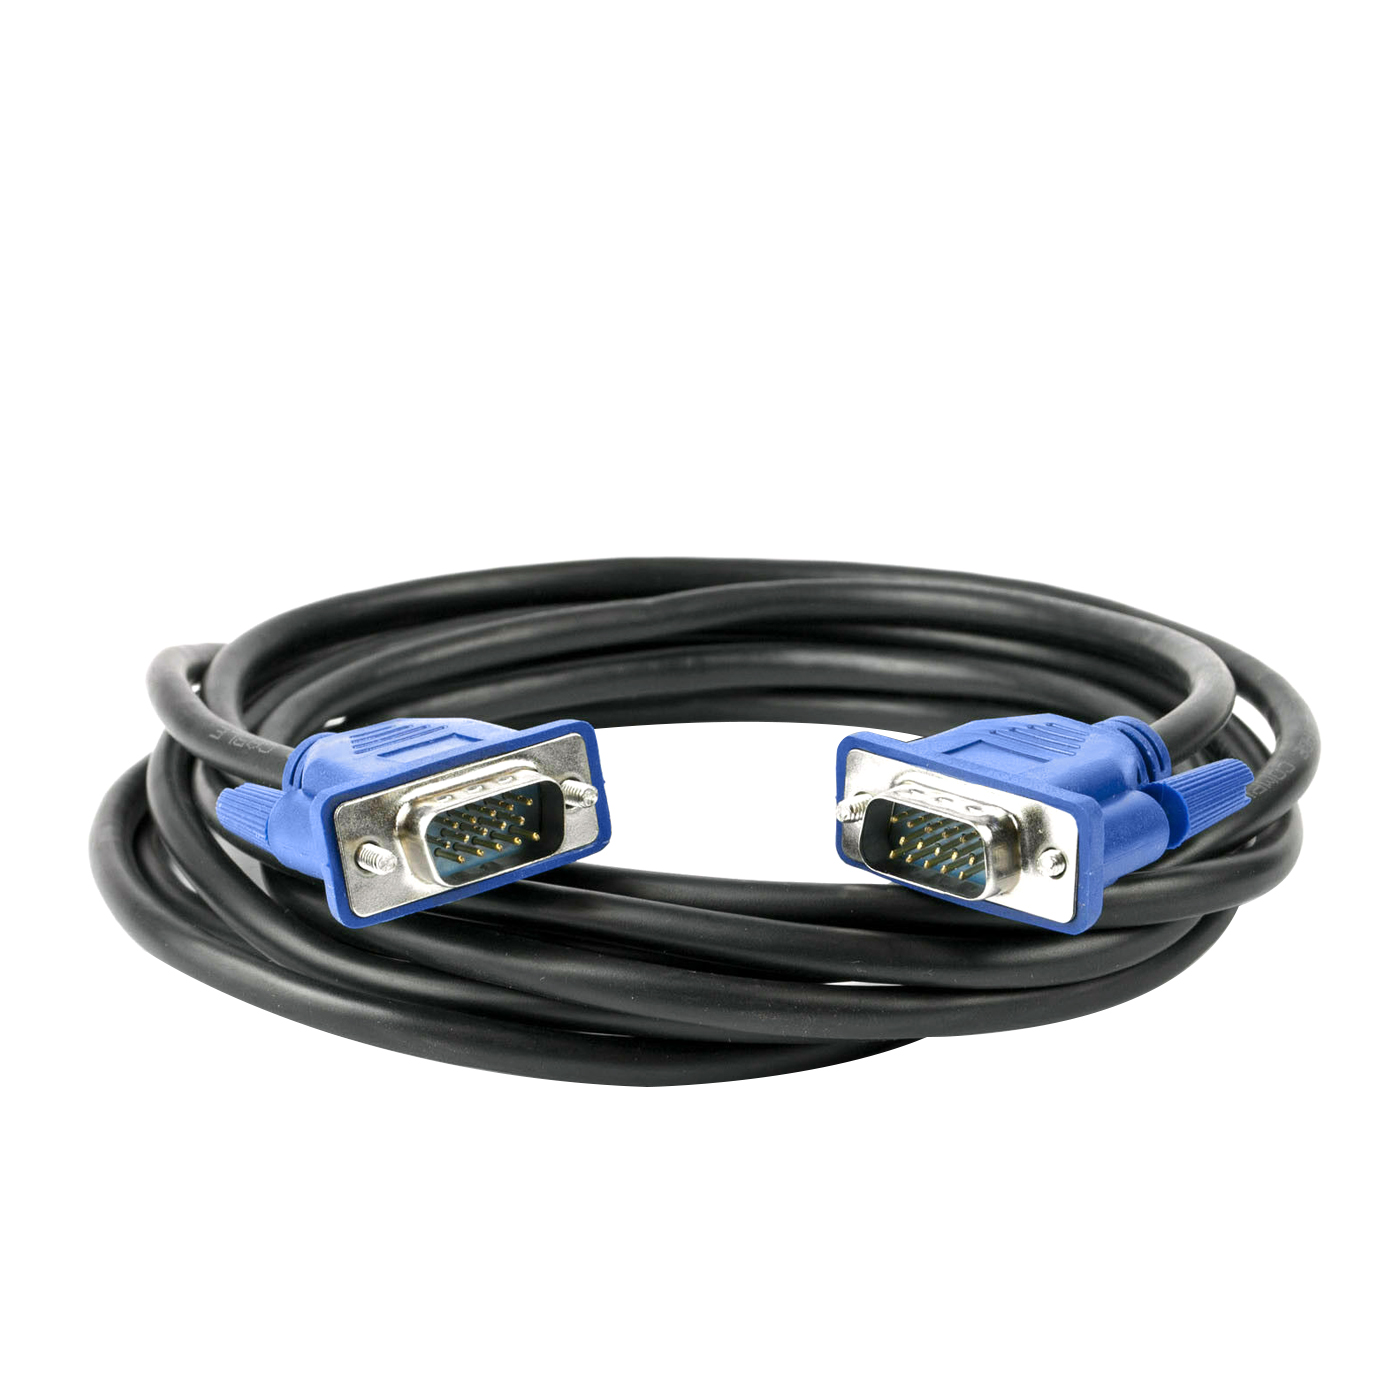 Computer Cables 1.5m 3m 5m 10m 1080P VGA HD 15 Pin Male to Male Extension Cable Cord for PC Laptop Projector HDTV Monitor Cable Length: 10m, Color: Black Blue 